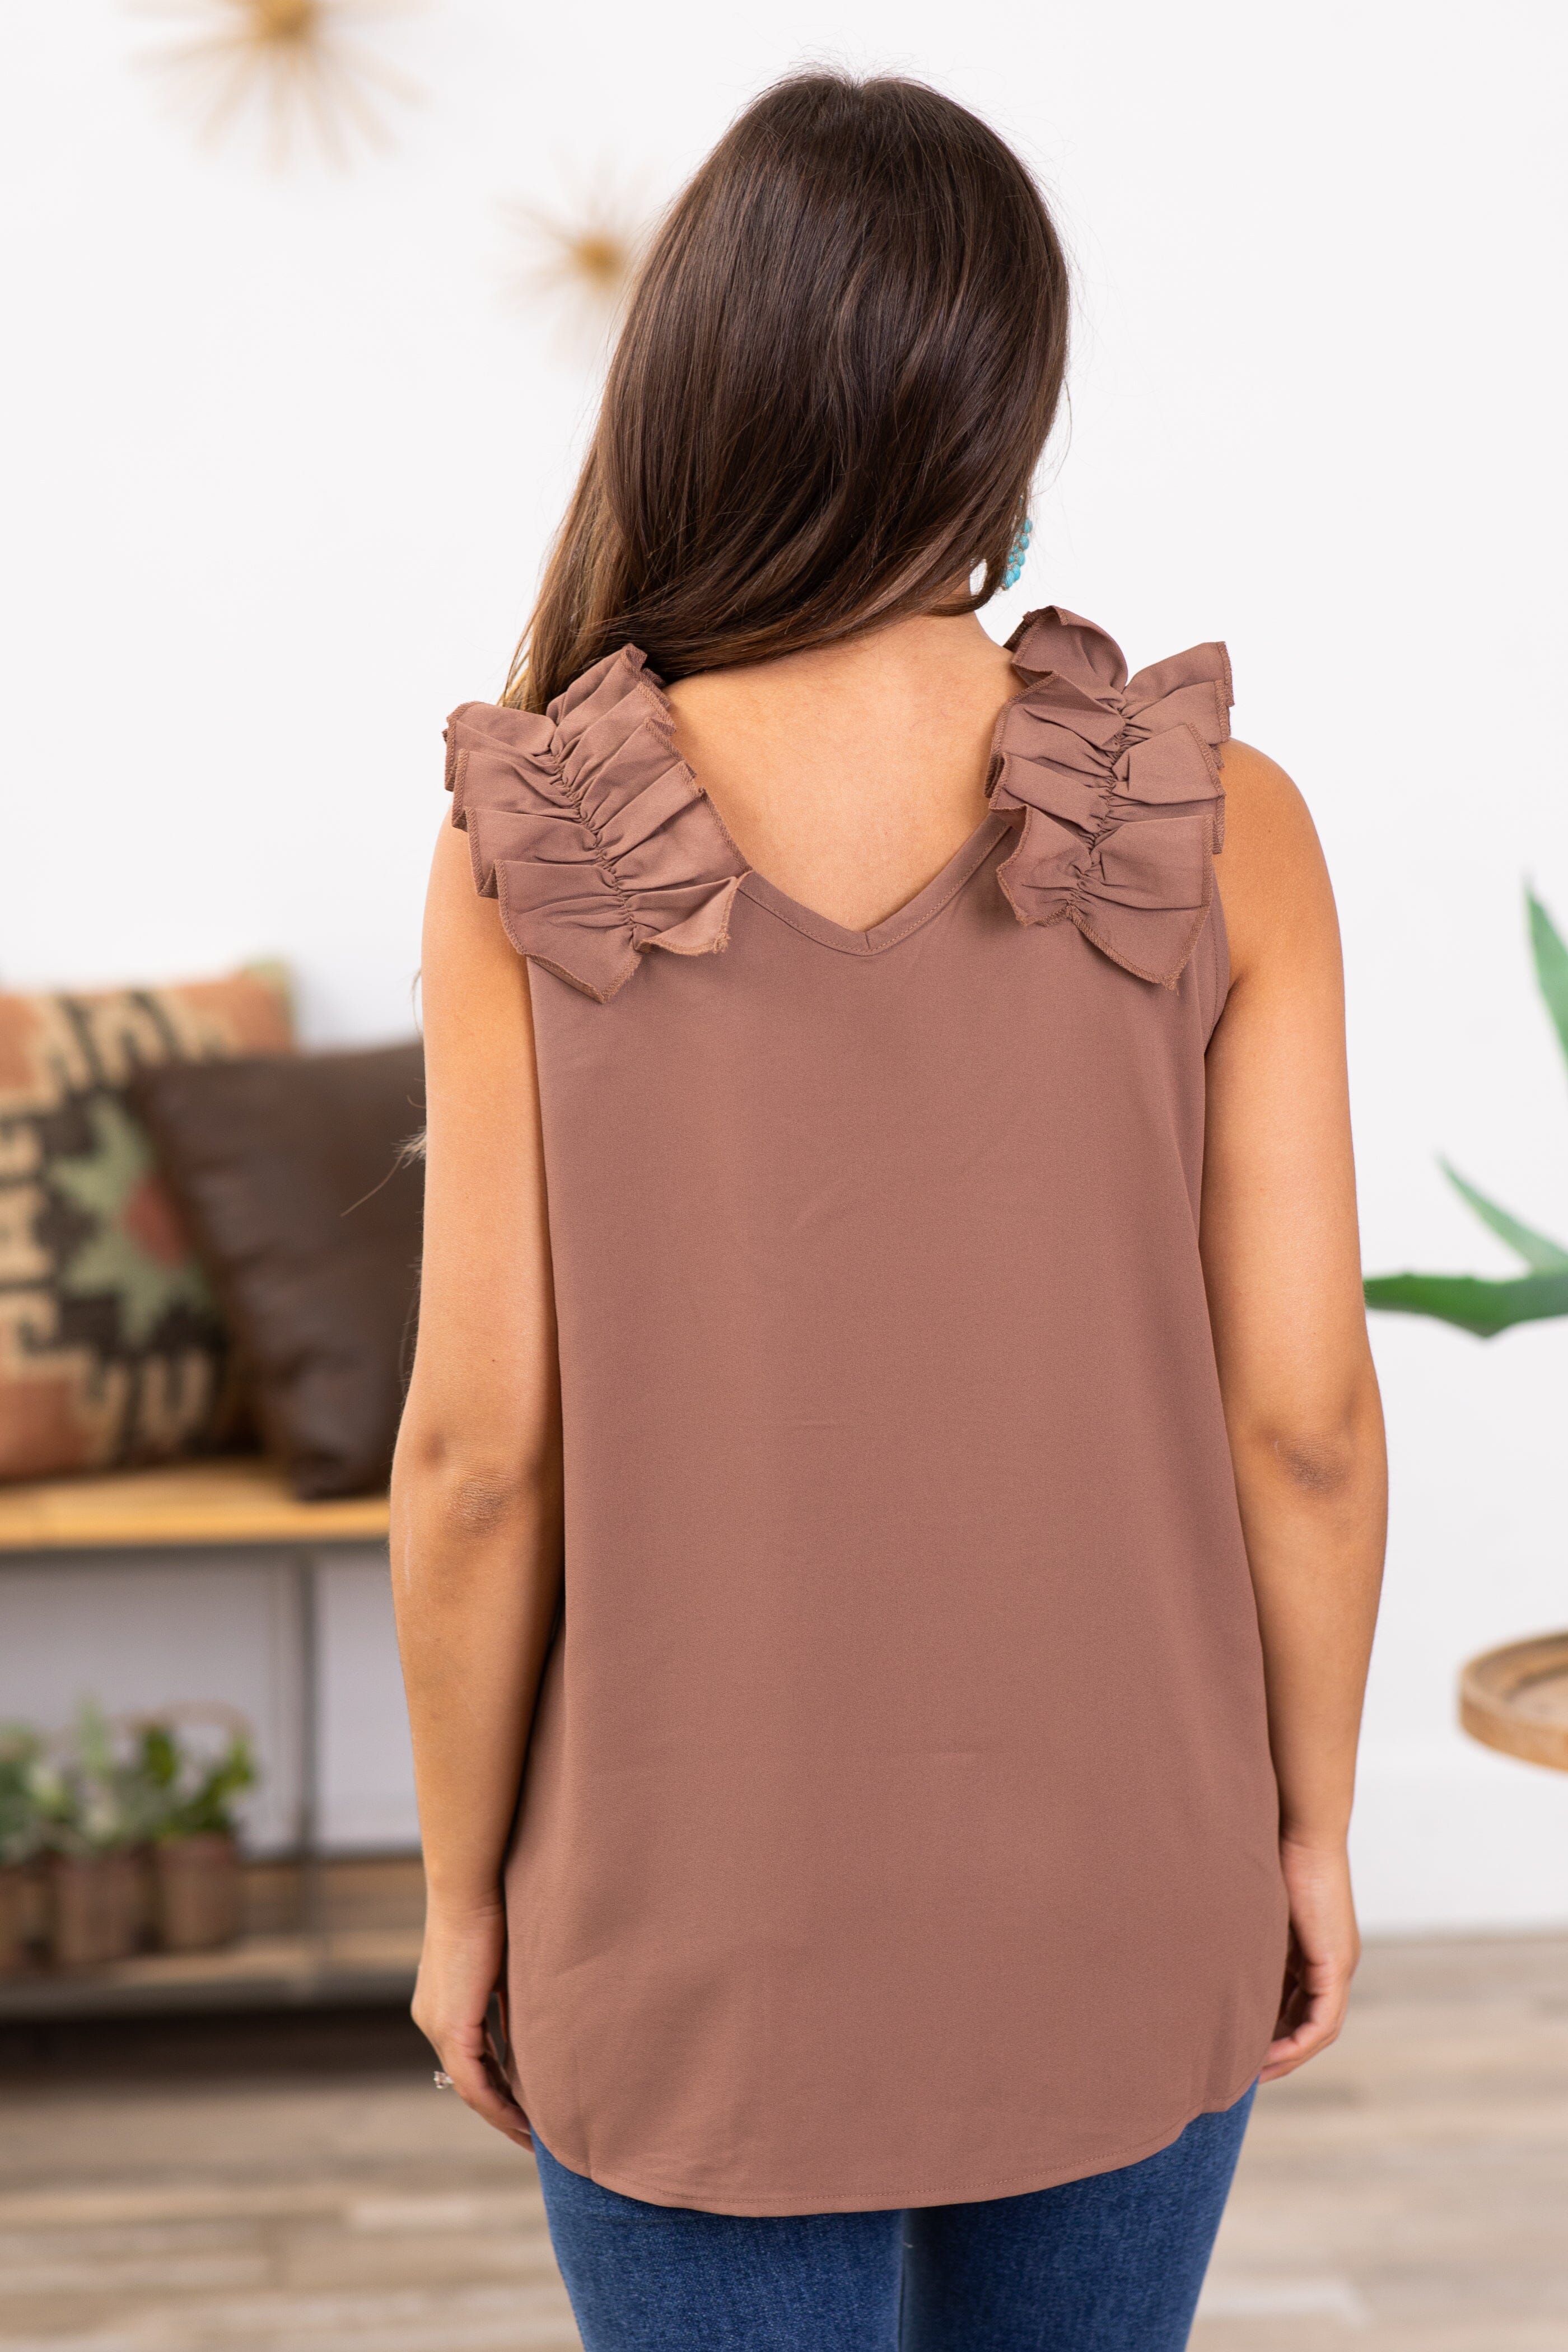 Mocha V-Neck Tank With Ruffle Shoulder - Filly Flair